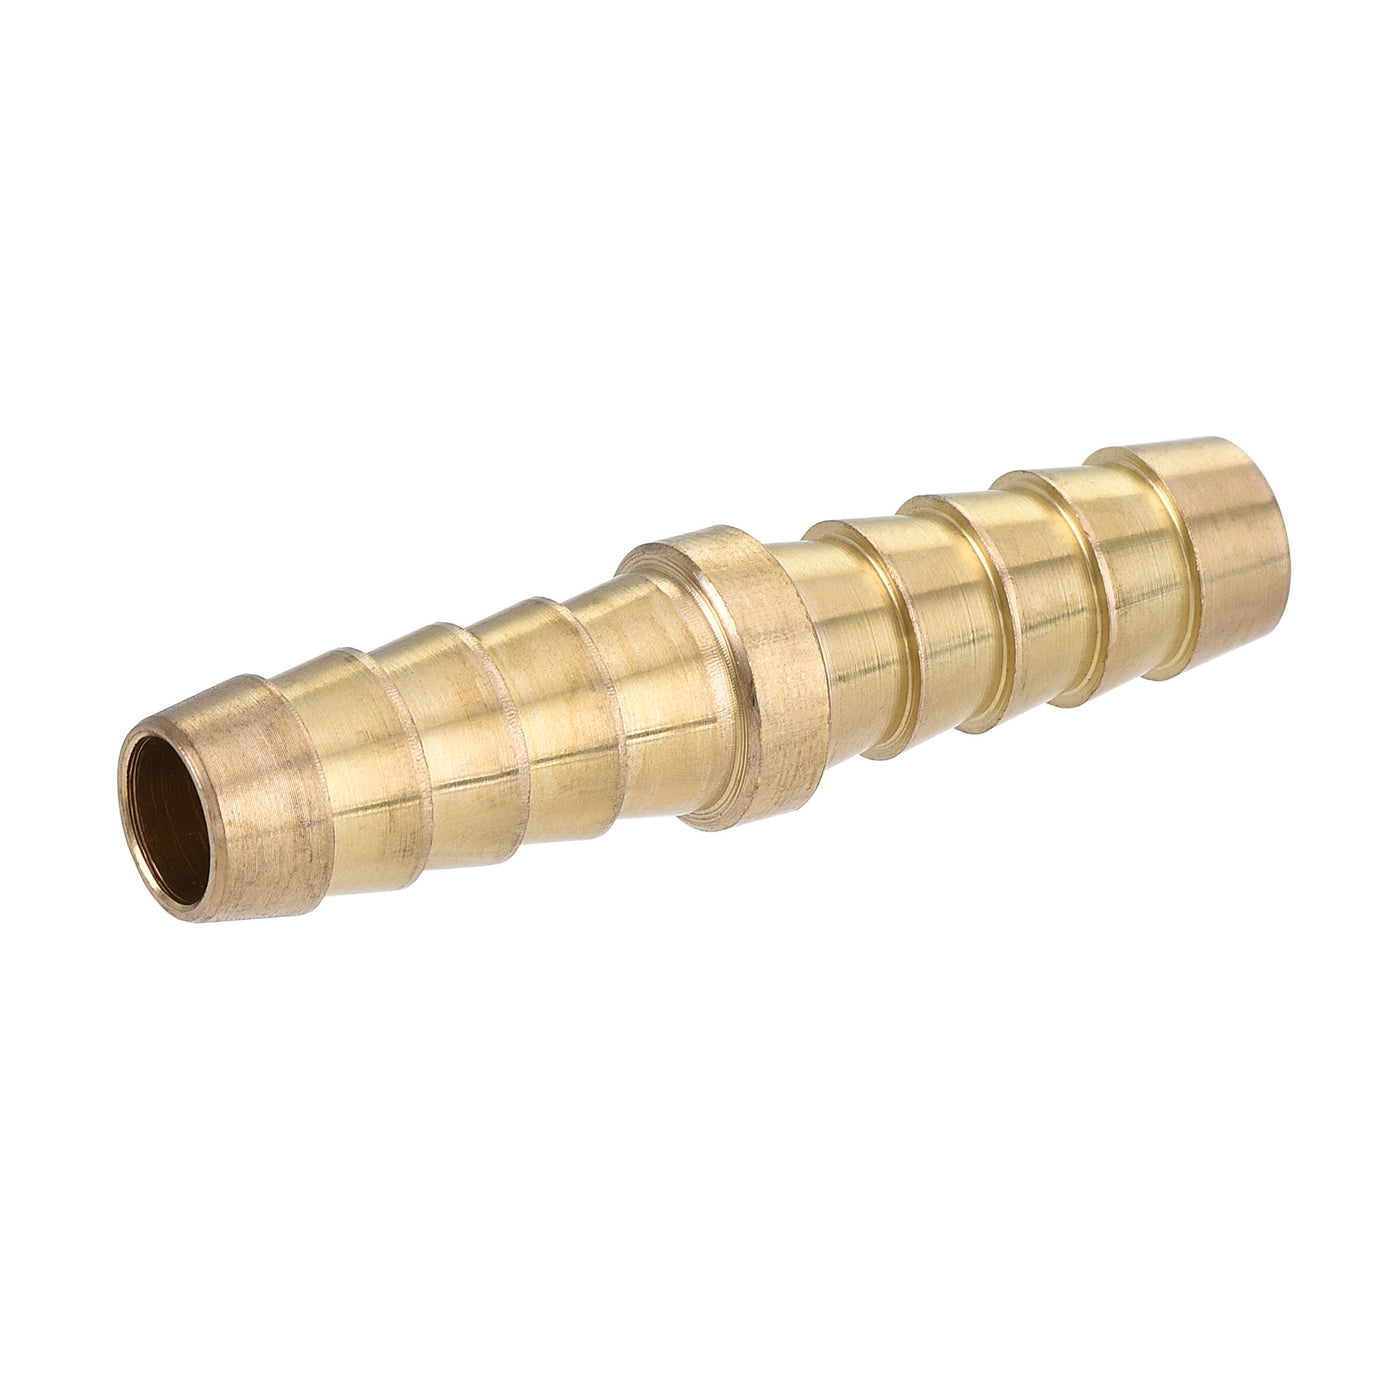 uxcell Uxcell Hose Barb Fitting, 3/8x3/8inch Brass Hollow Straight Quick Connector for Water Fuel Air Oil Gas, Pack of 2